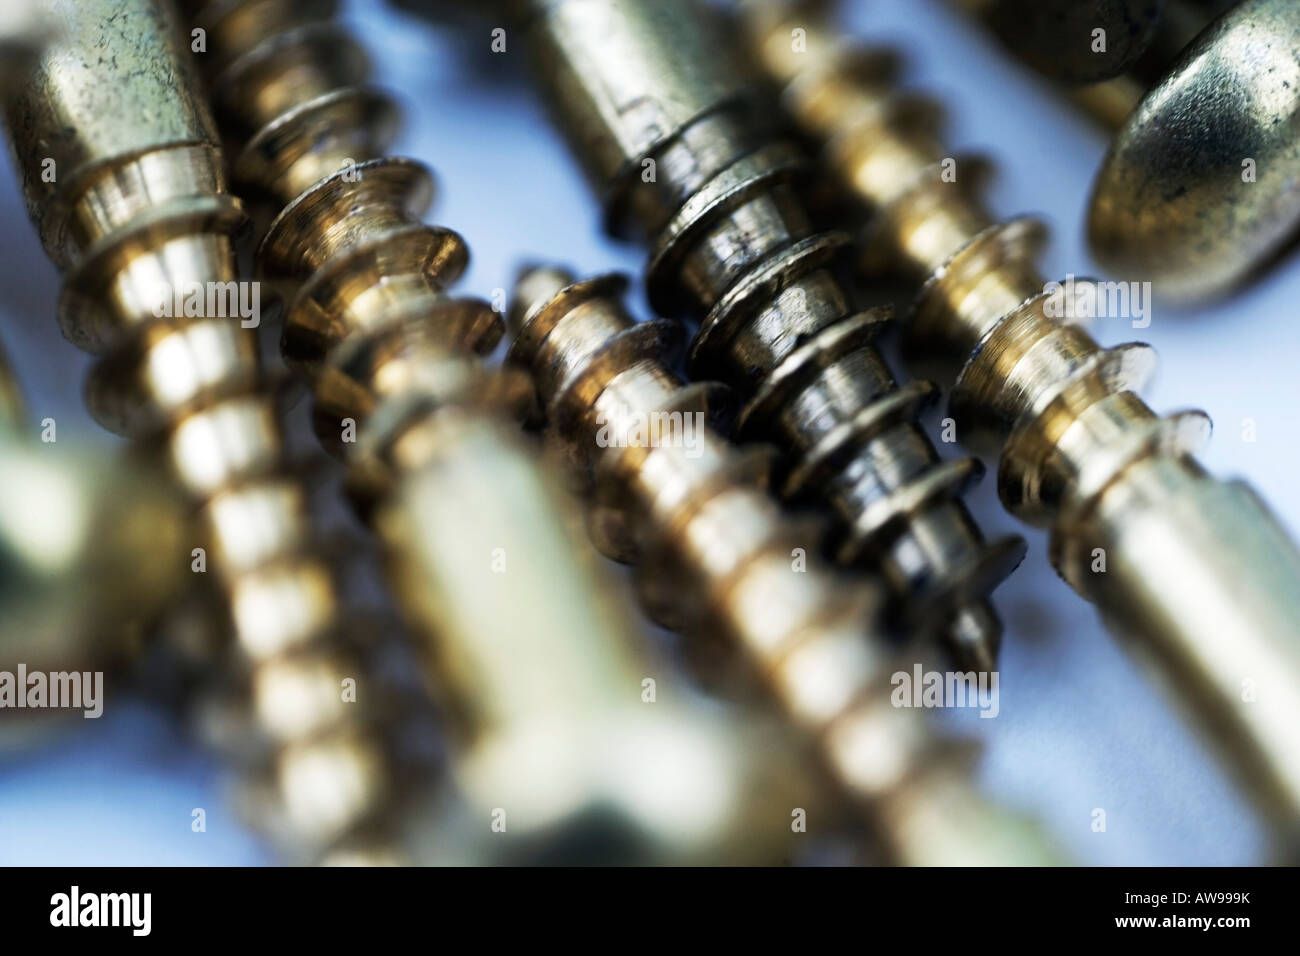 Traditional brass screws in macro close-up detail Stock Photo